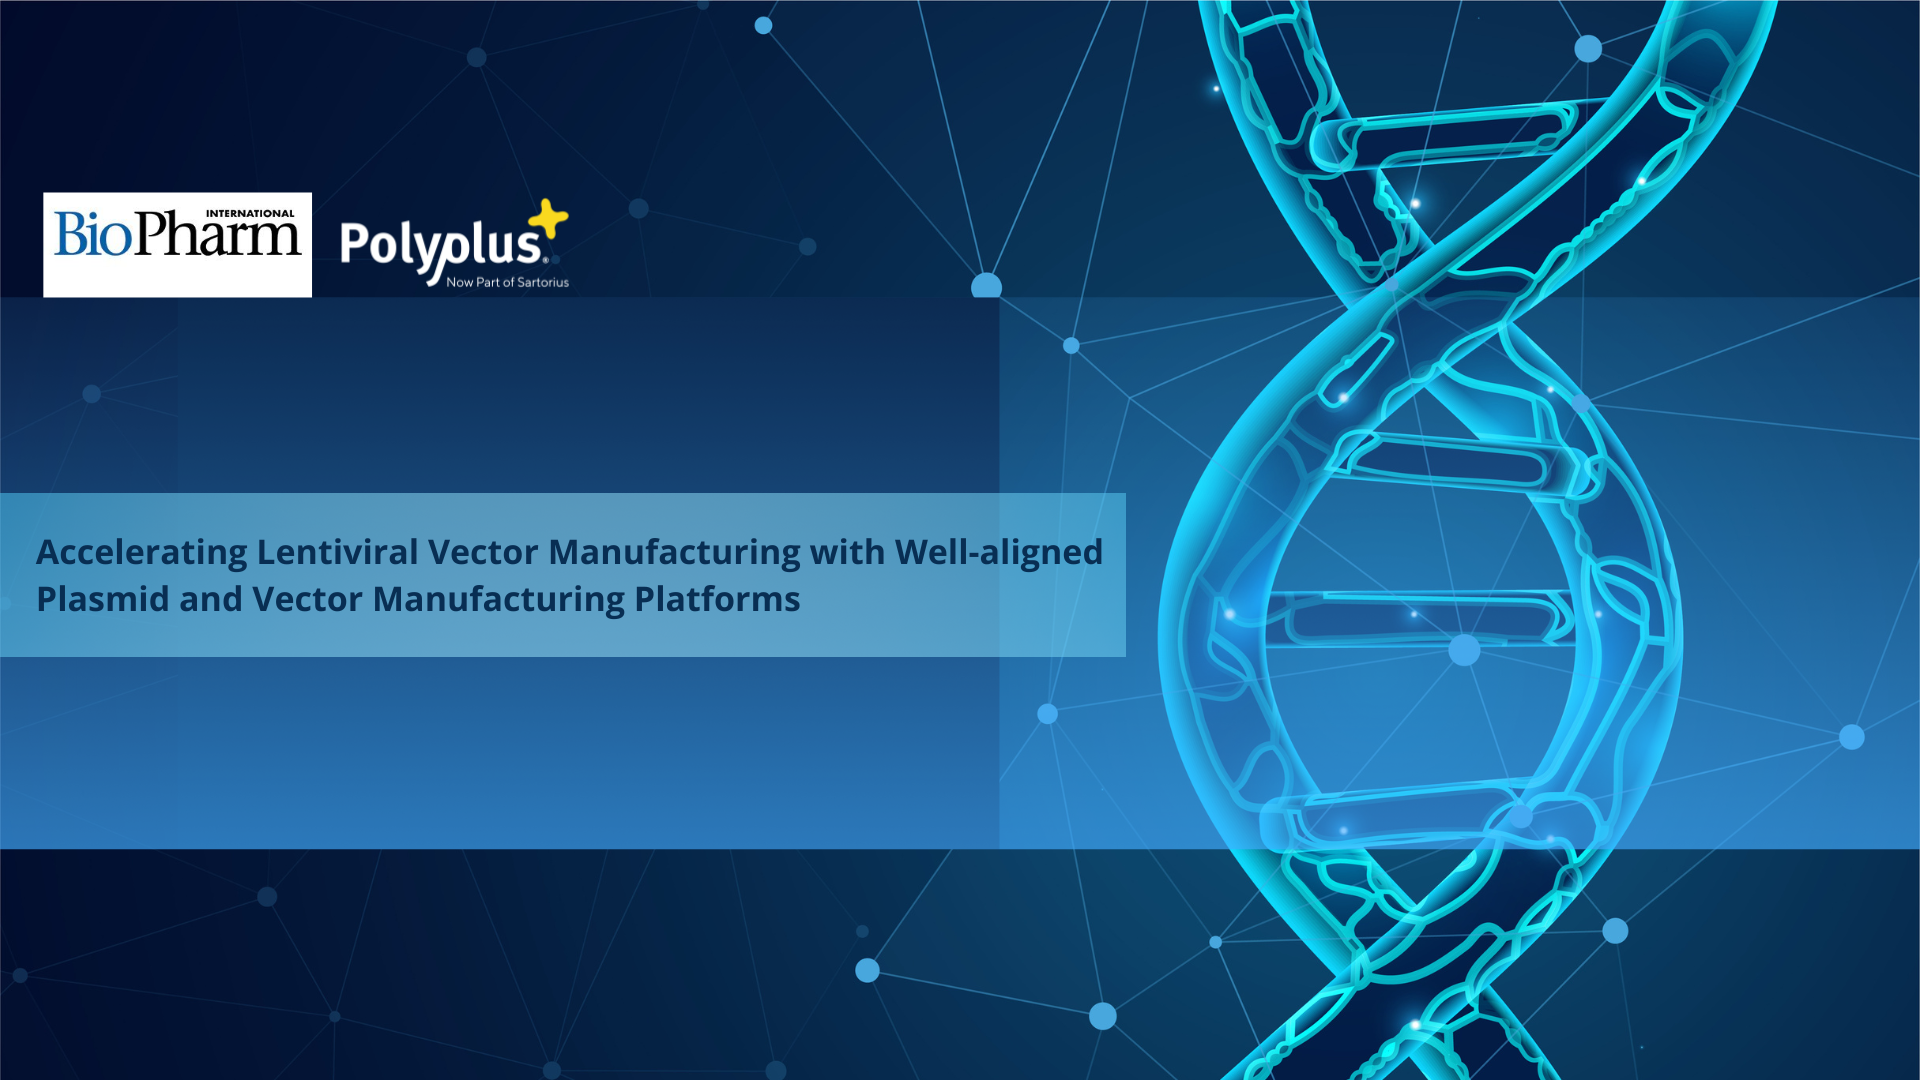 Accelerating Lentiviral Vector Manufacturing with Well-aligned Plasmid and Vector Manufacturing Platforms